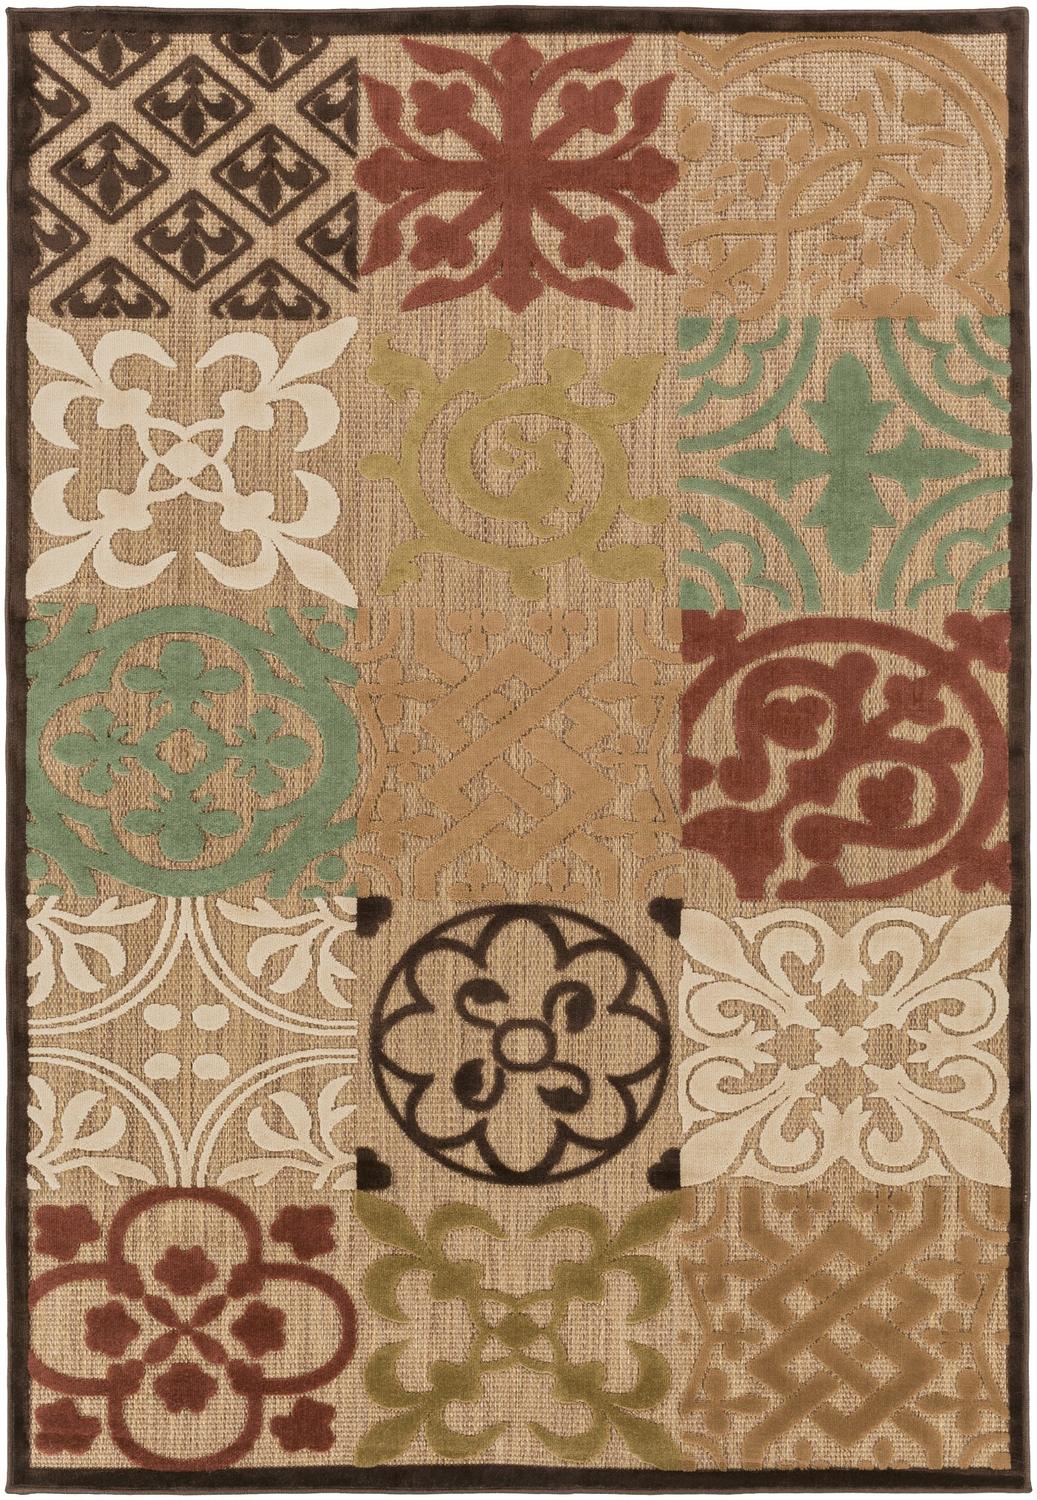 Diva At Home  7.5' x 7.5' Tuscan Sun Chestnut Brown and Teal Square Outdoor Area Throw Rug